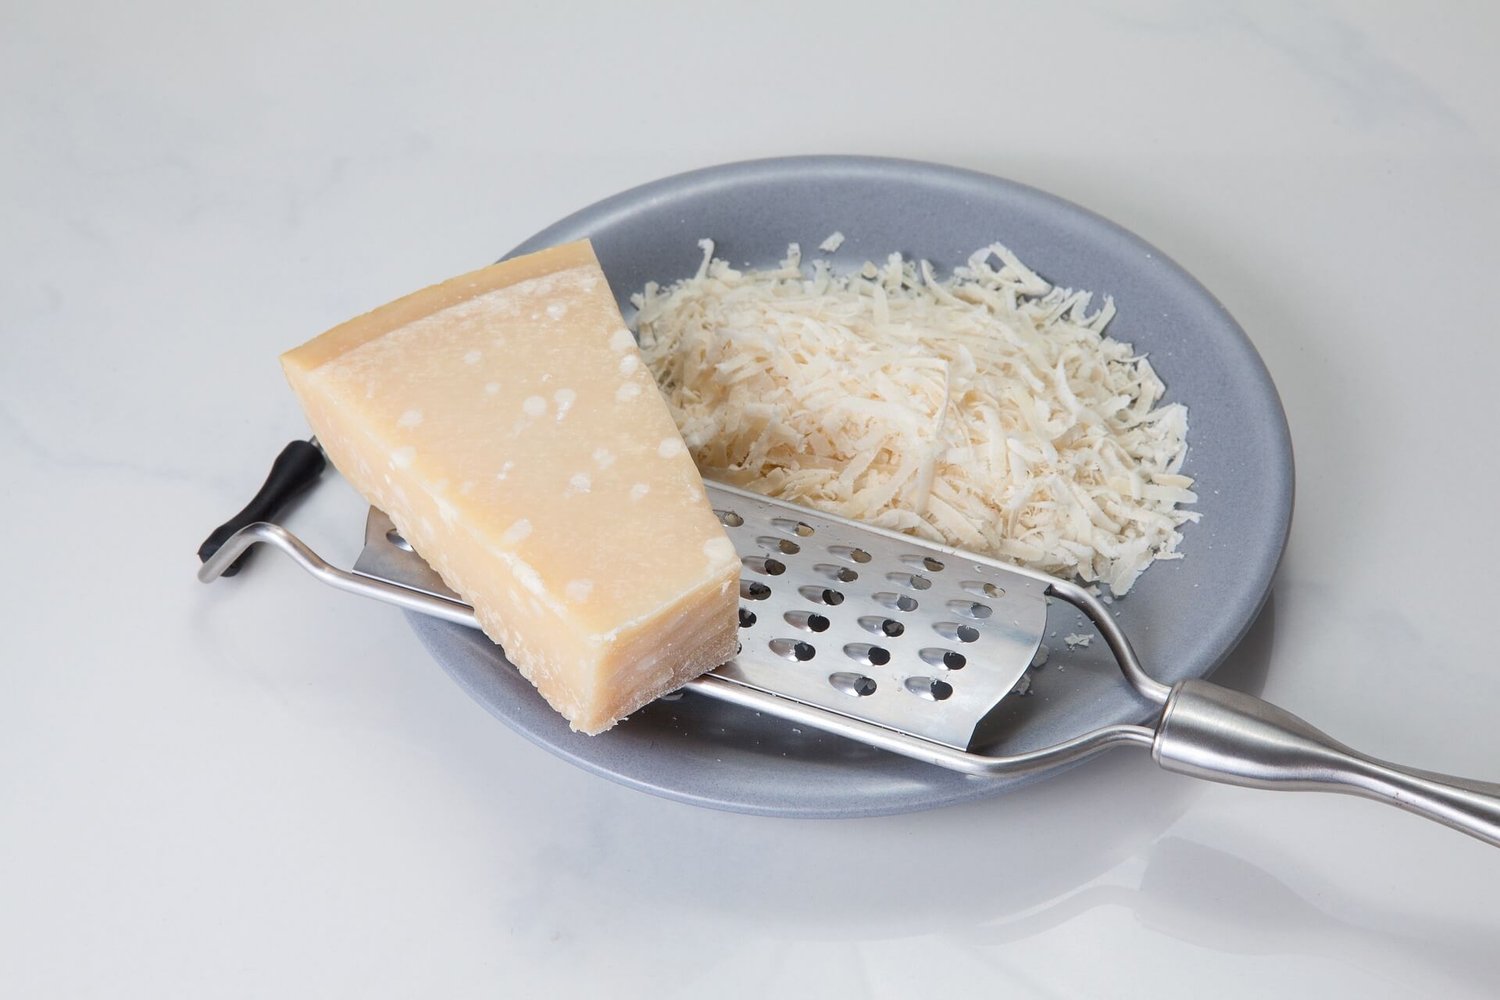 Olive Garden Sells Iconic Cheese Grater to Customers